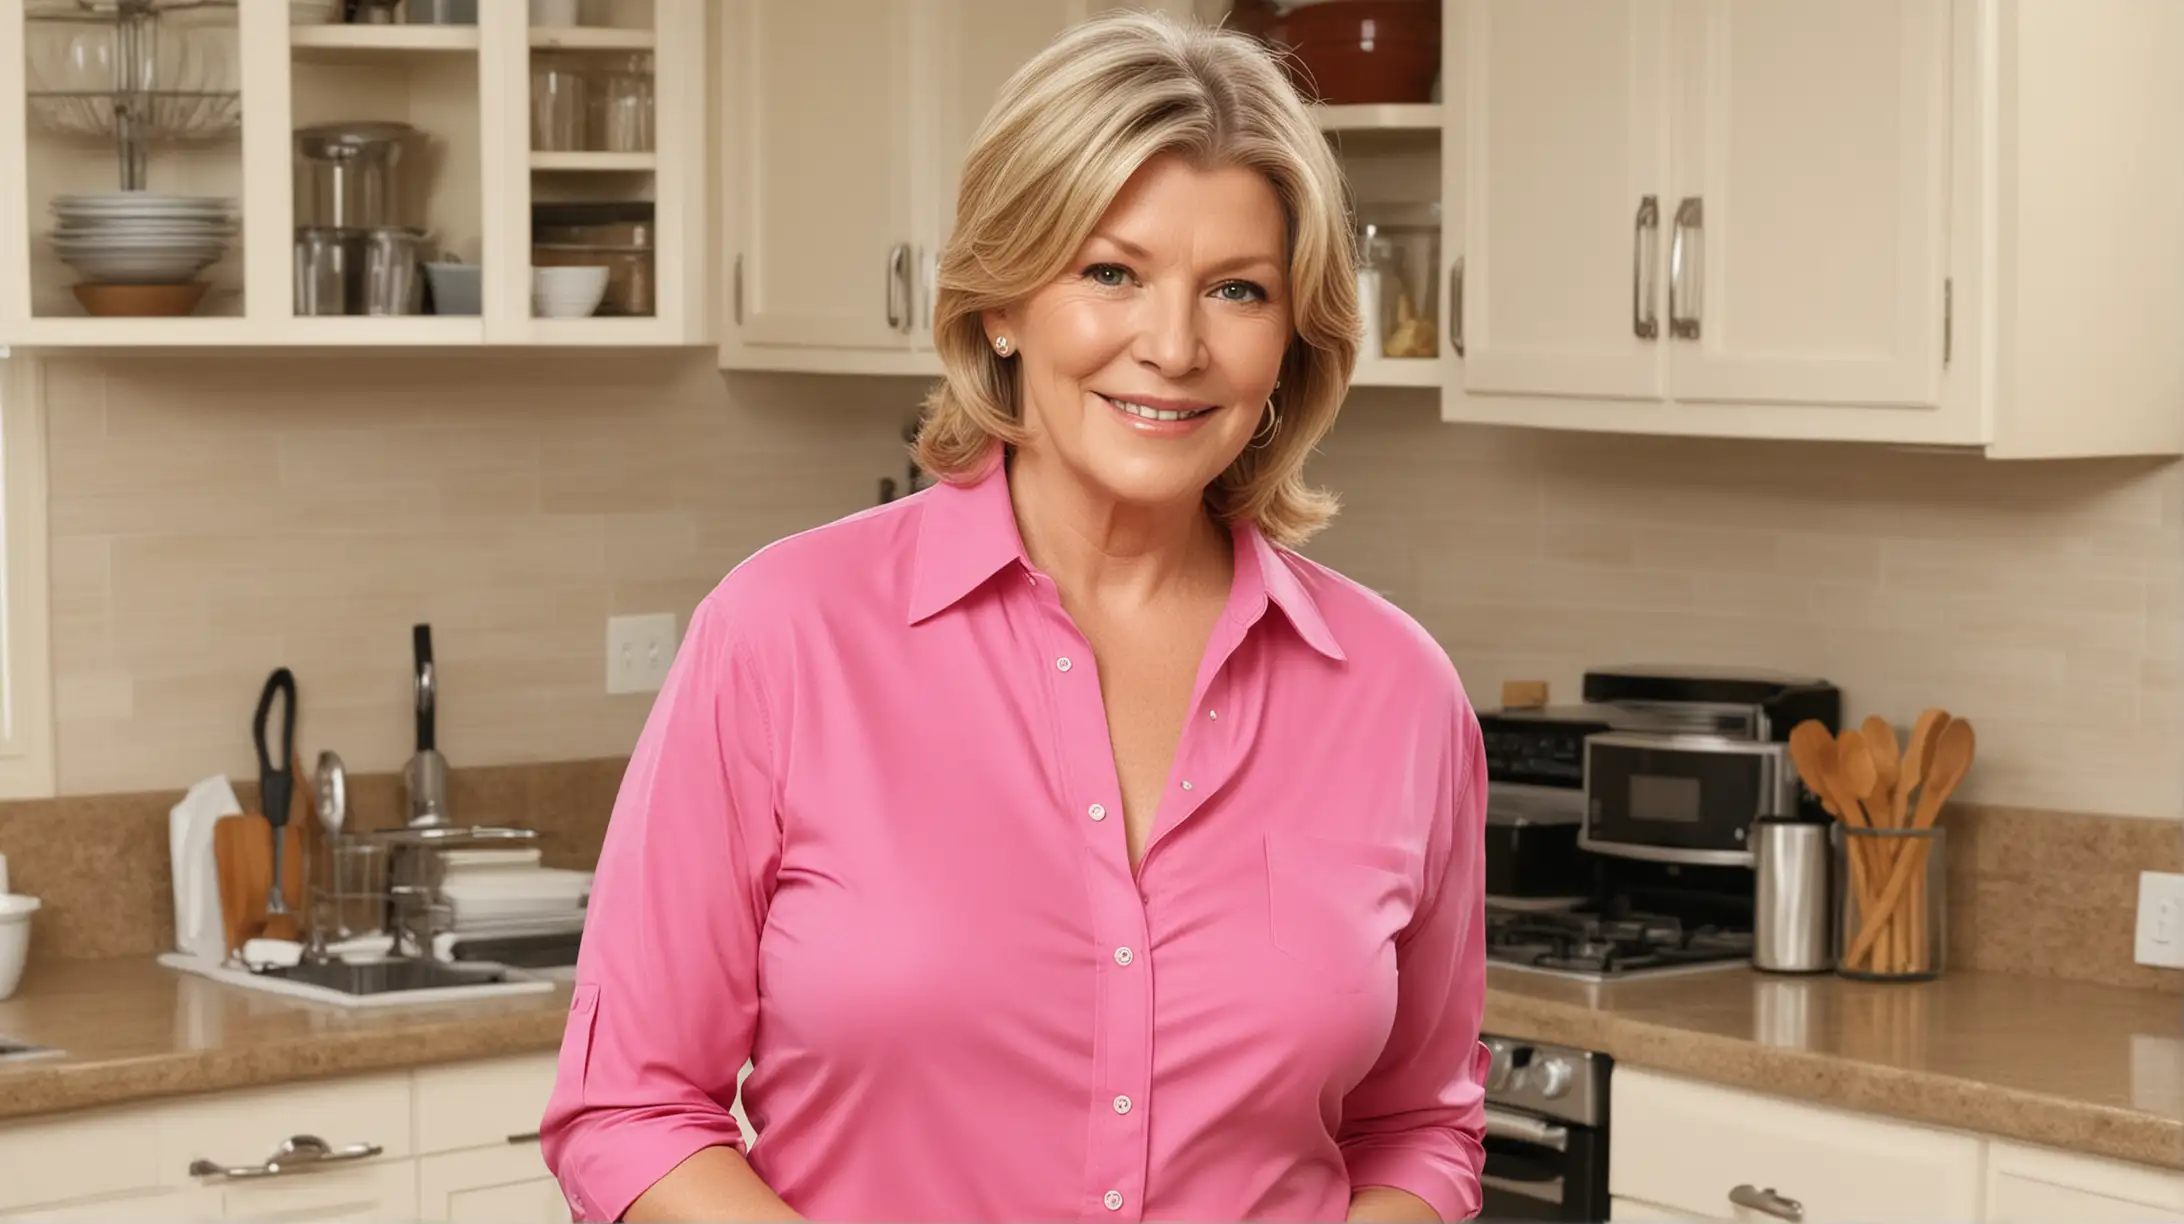 Martha Stewart look a like with very large breasts in a hot pink shirt in the kitchen 